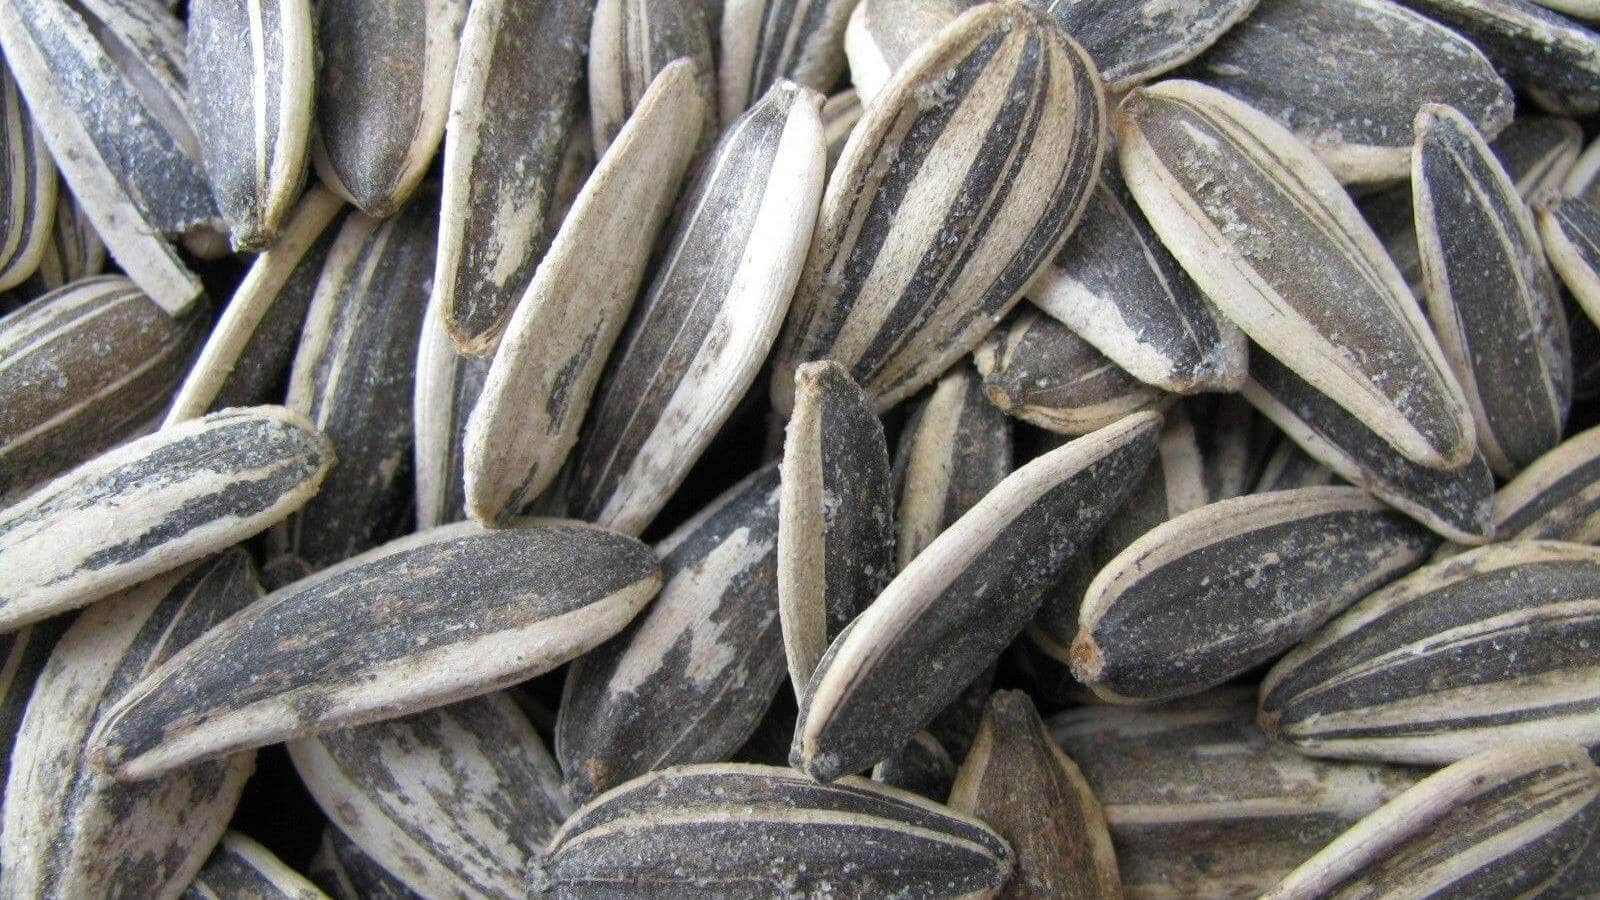 A close up view of sunflower seeds with shells.